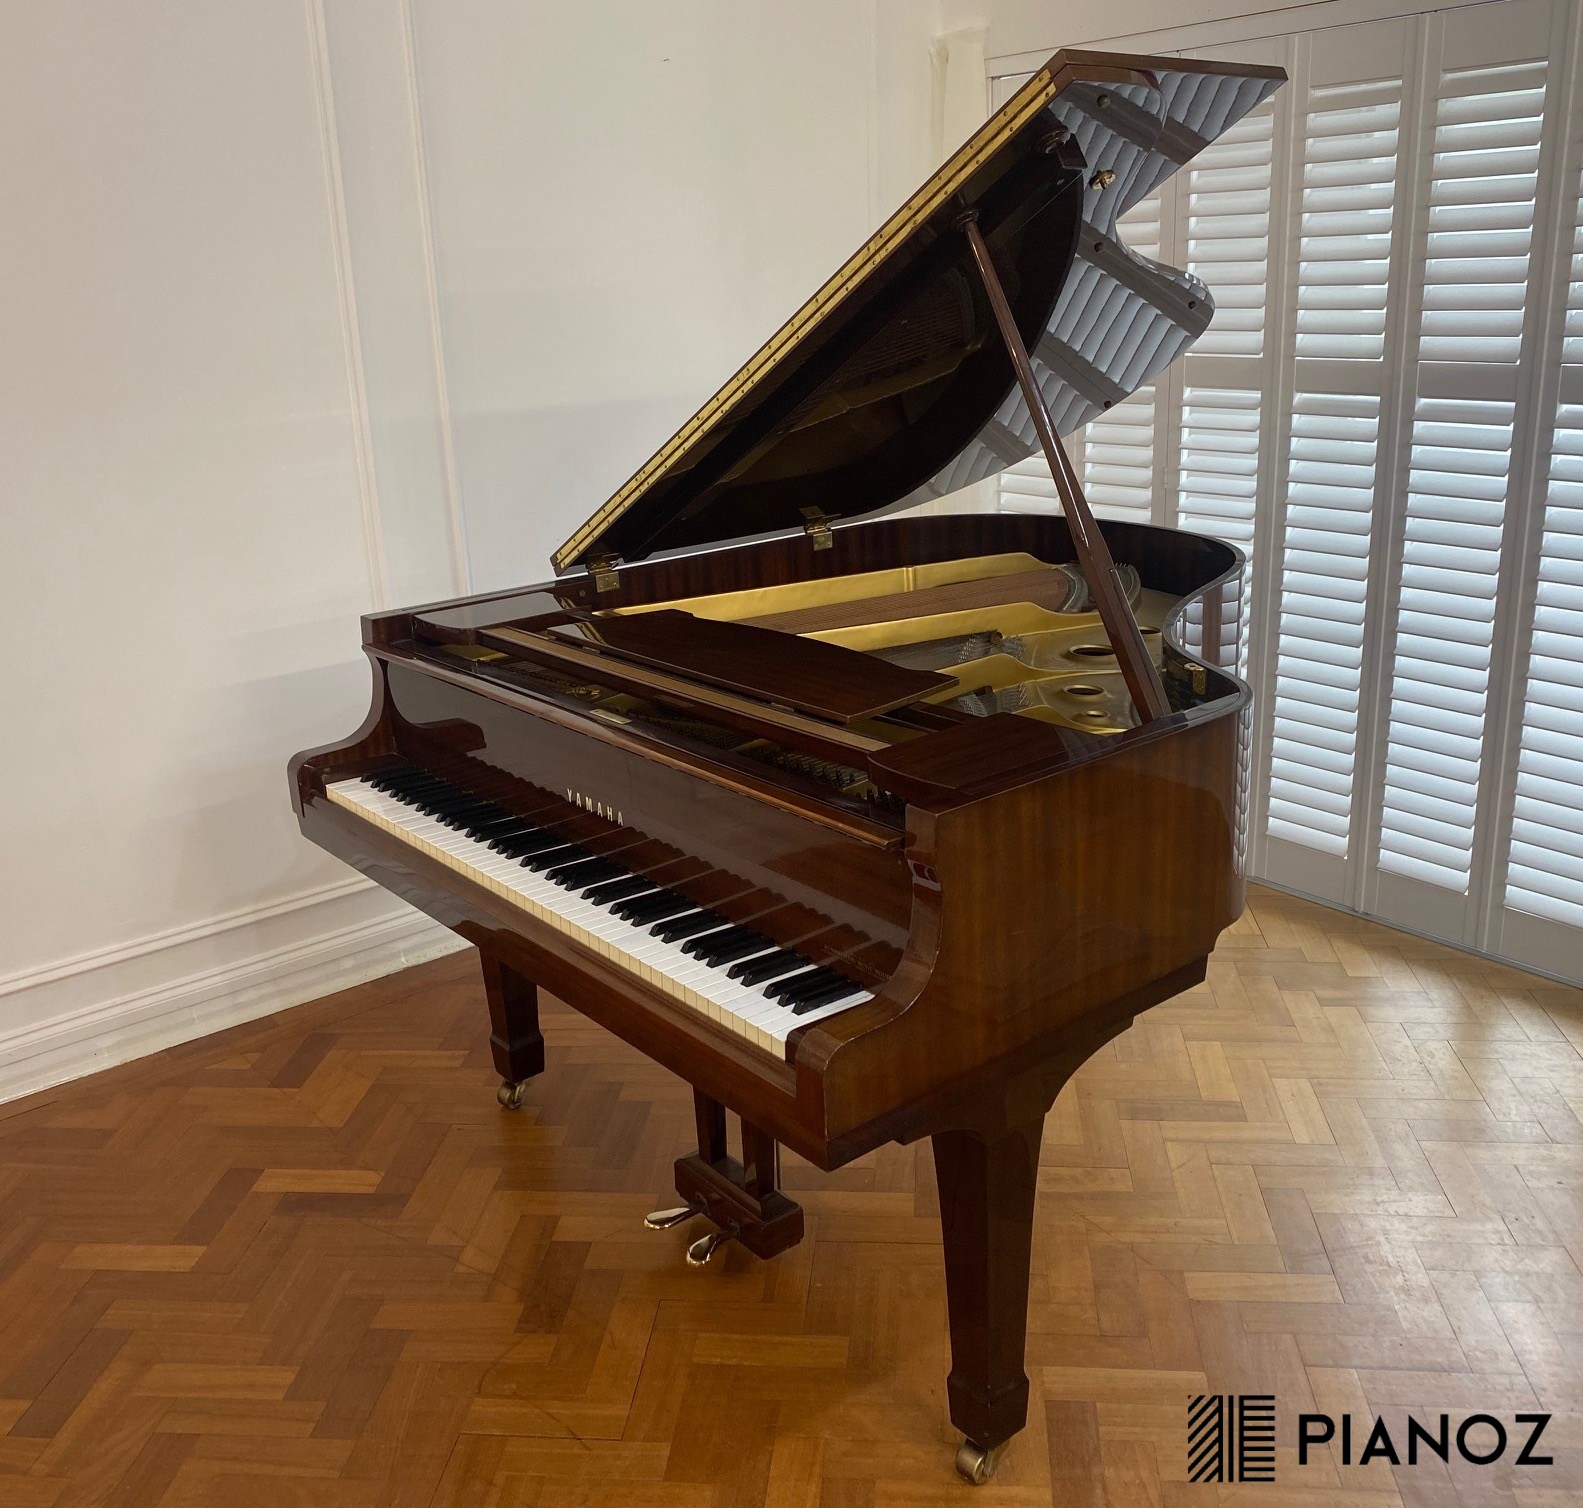 Yamaha G2 Baby Grand Piano piano for sale in UK